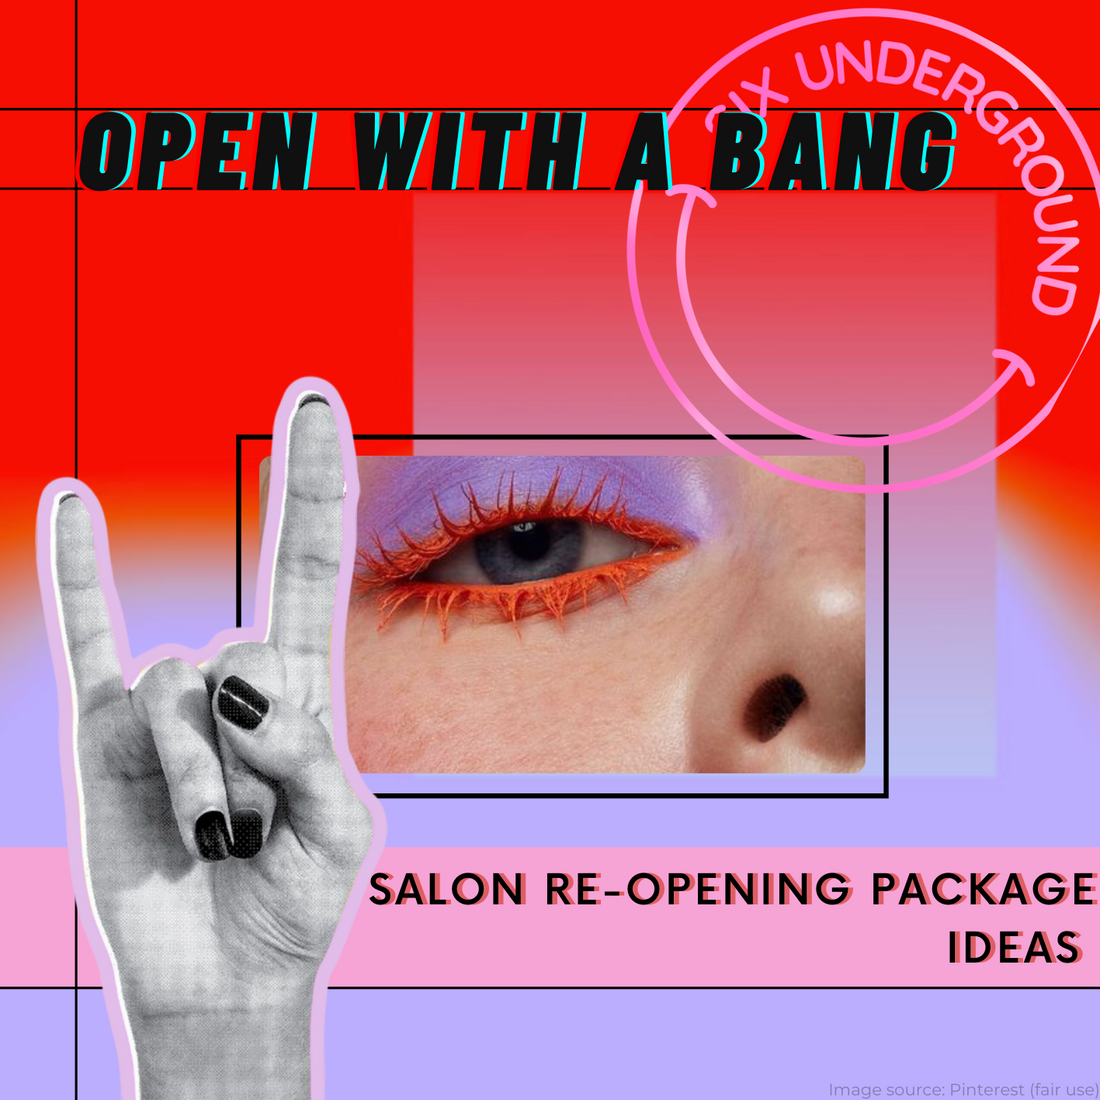 Open with a BANG - Salon Re-Opening Package Ideas